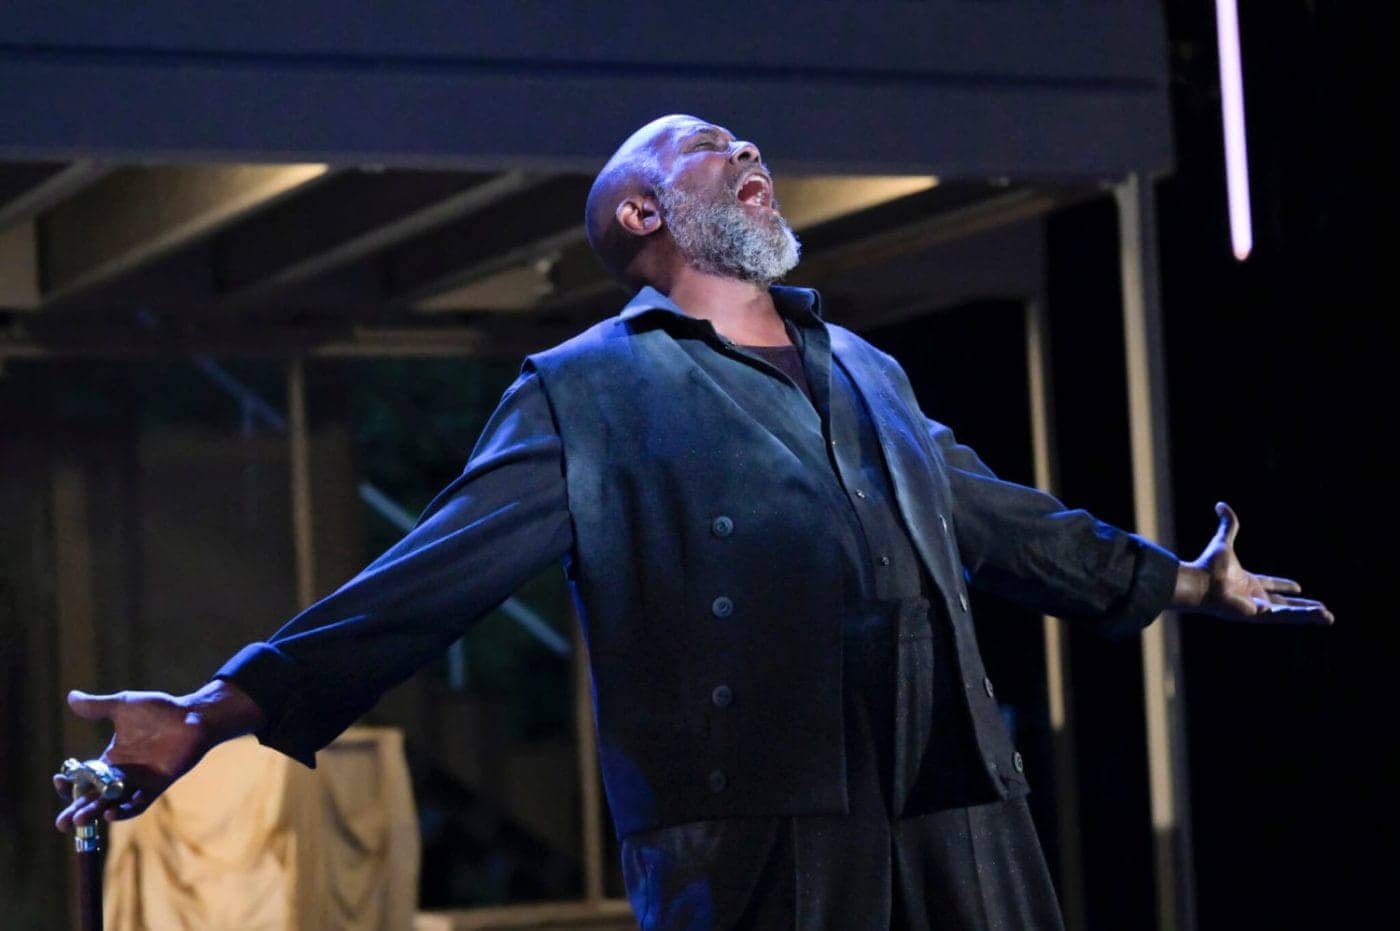 James-A.-Williams-as-King-Lear-in-Marcus-Gardleys-translated-‘Lear-0922-by-Kevin-Berne-Cal-Shakes-1400x931, How to make Shakespeare immersive , Culture Currents Local News & Views News & Views 